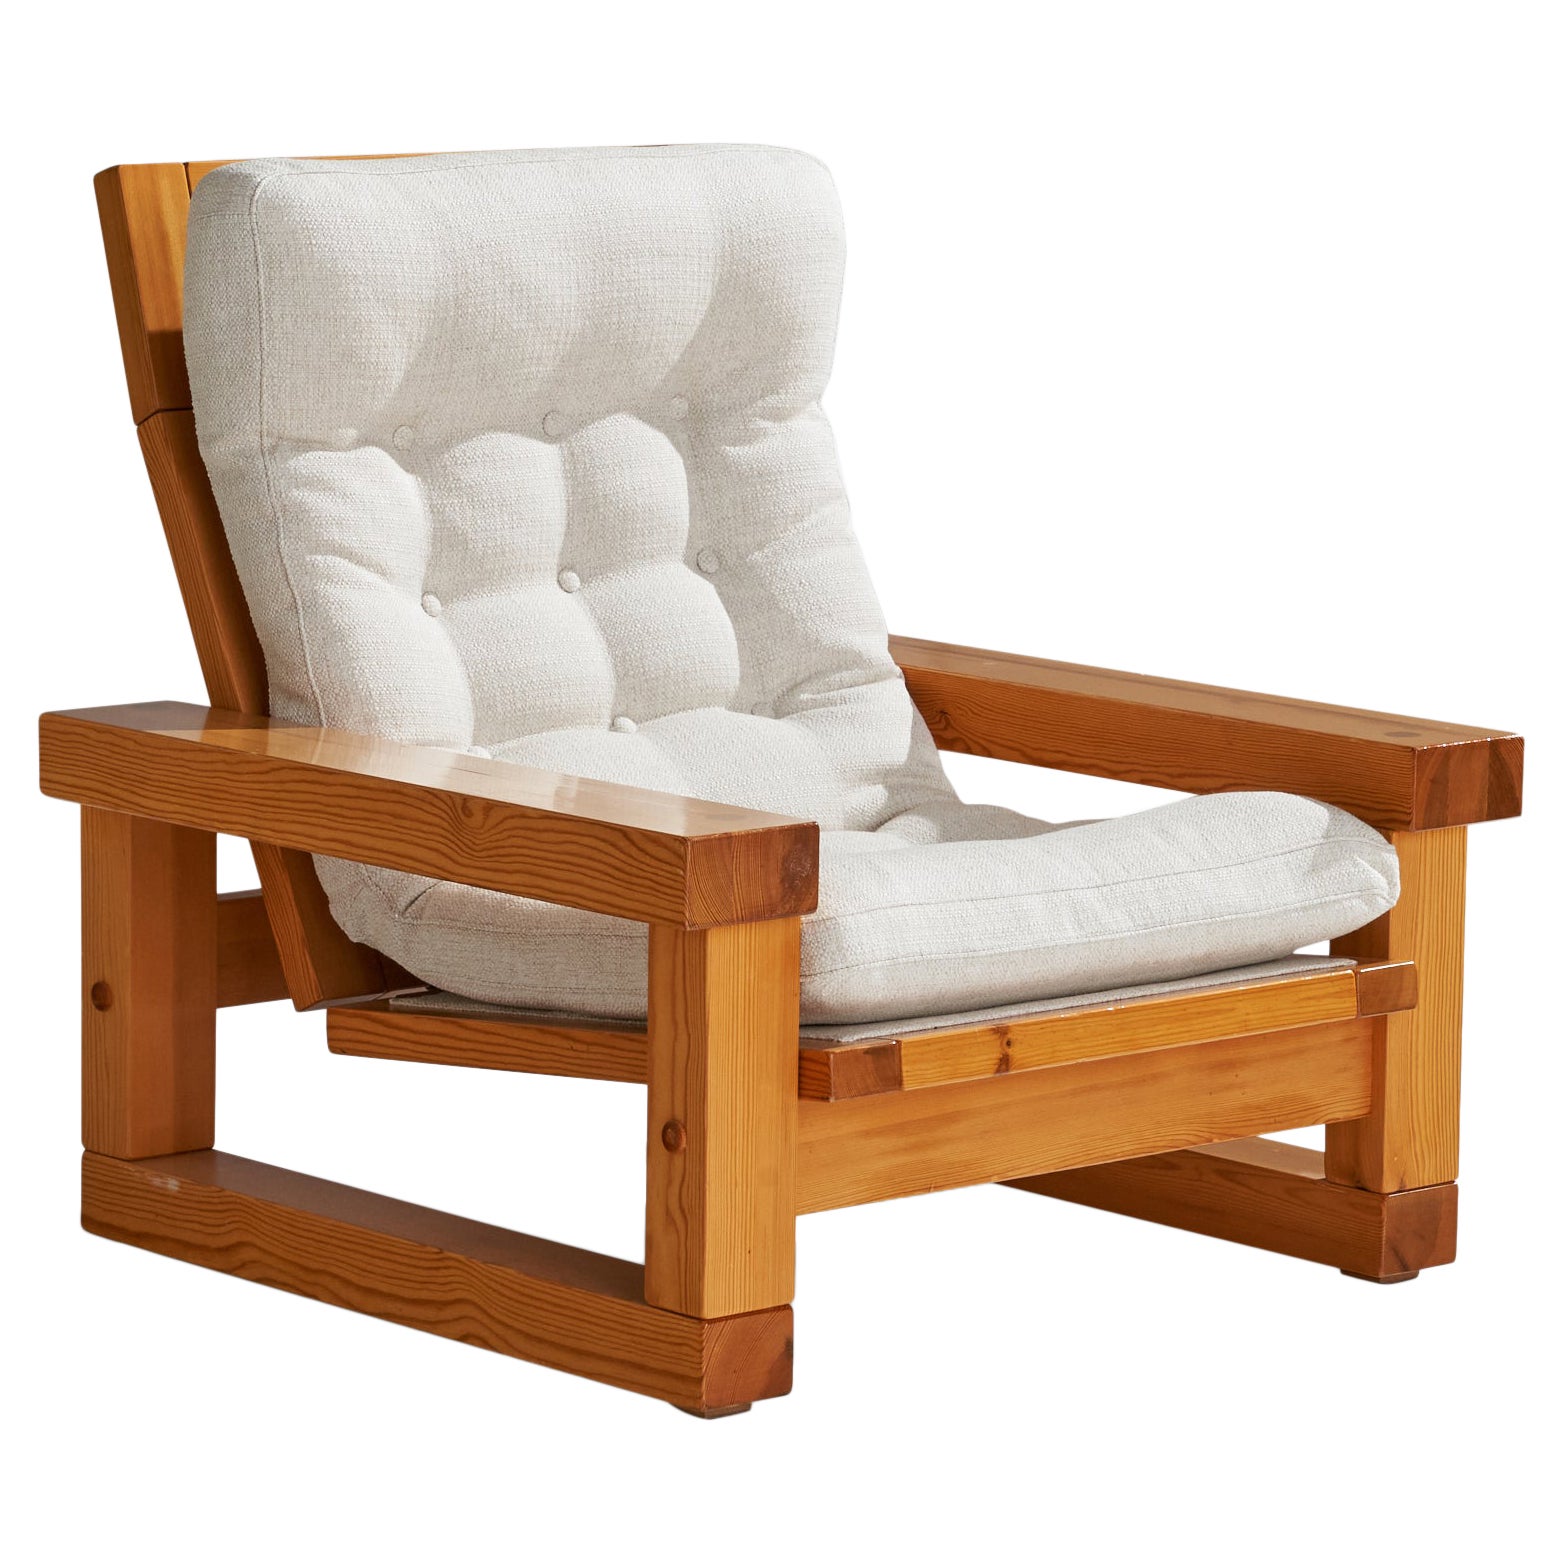 Christer Lundén, Lounge Chair, Pine, Fabric, Sweden, 1974 For Sale